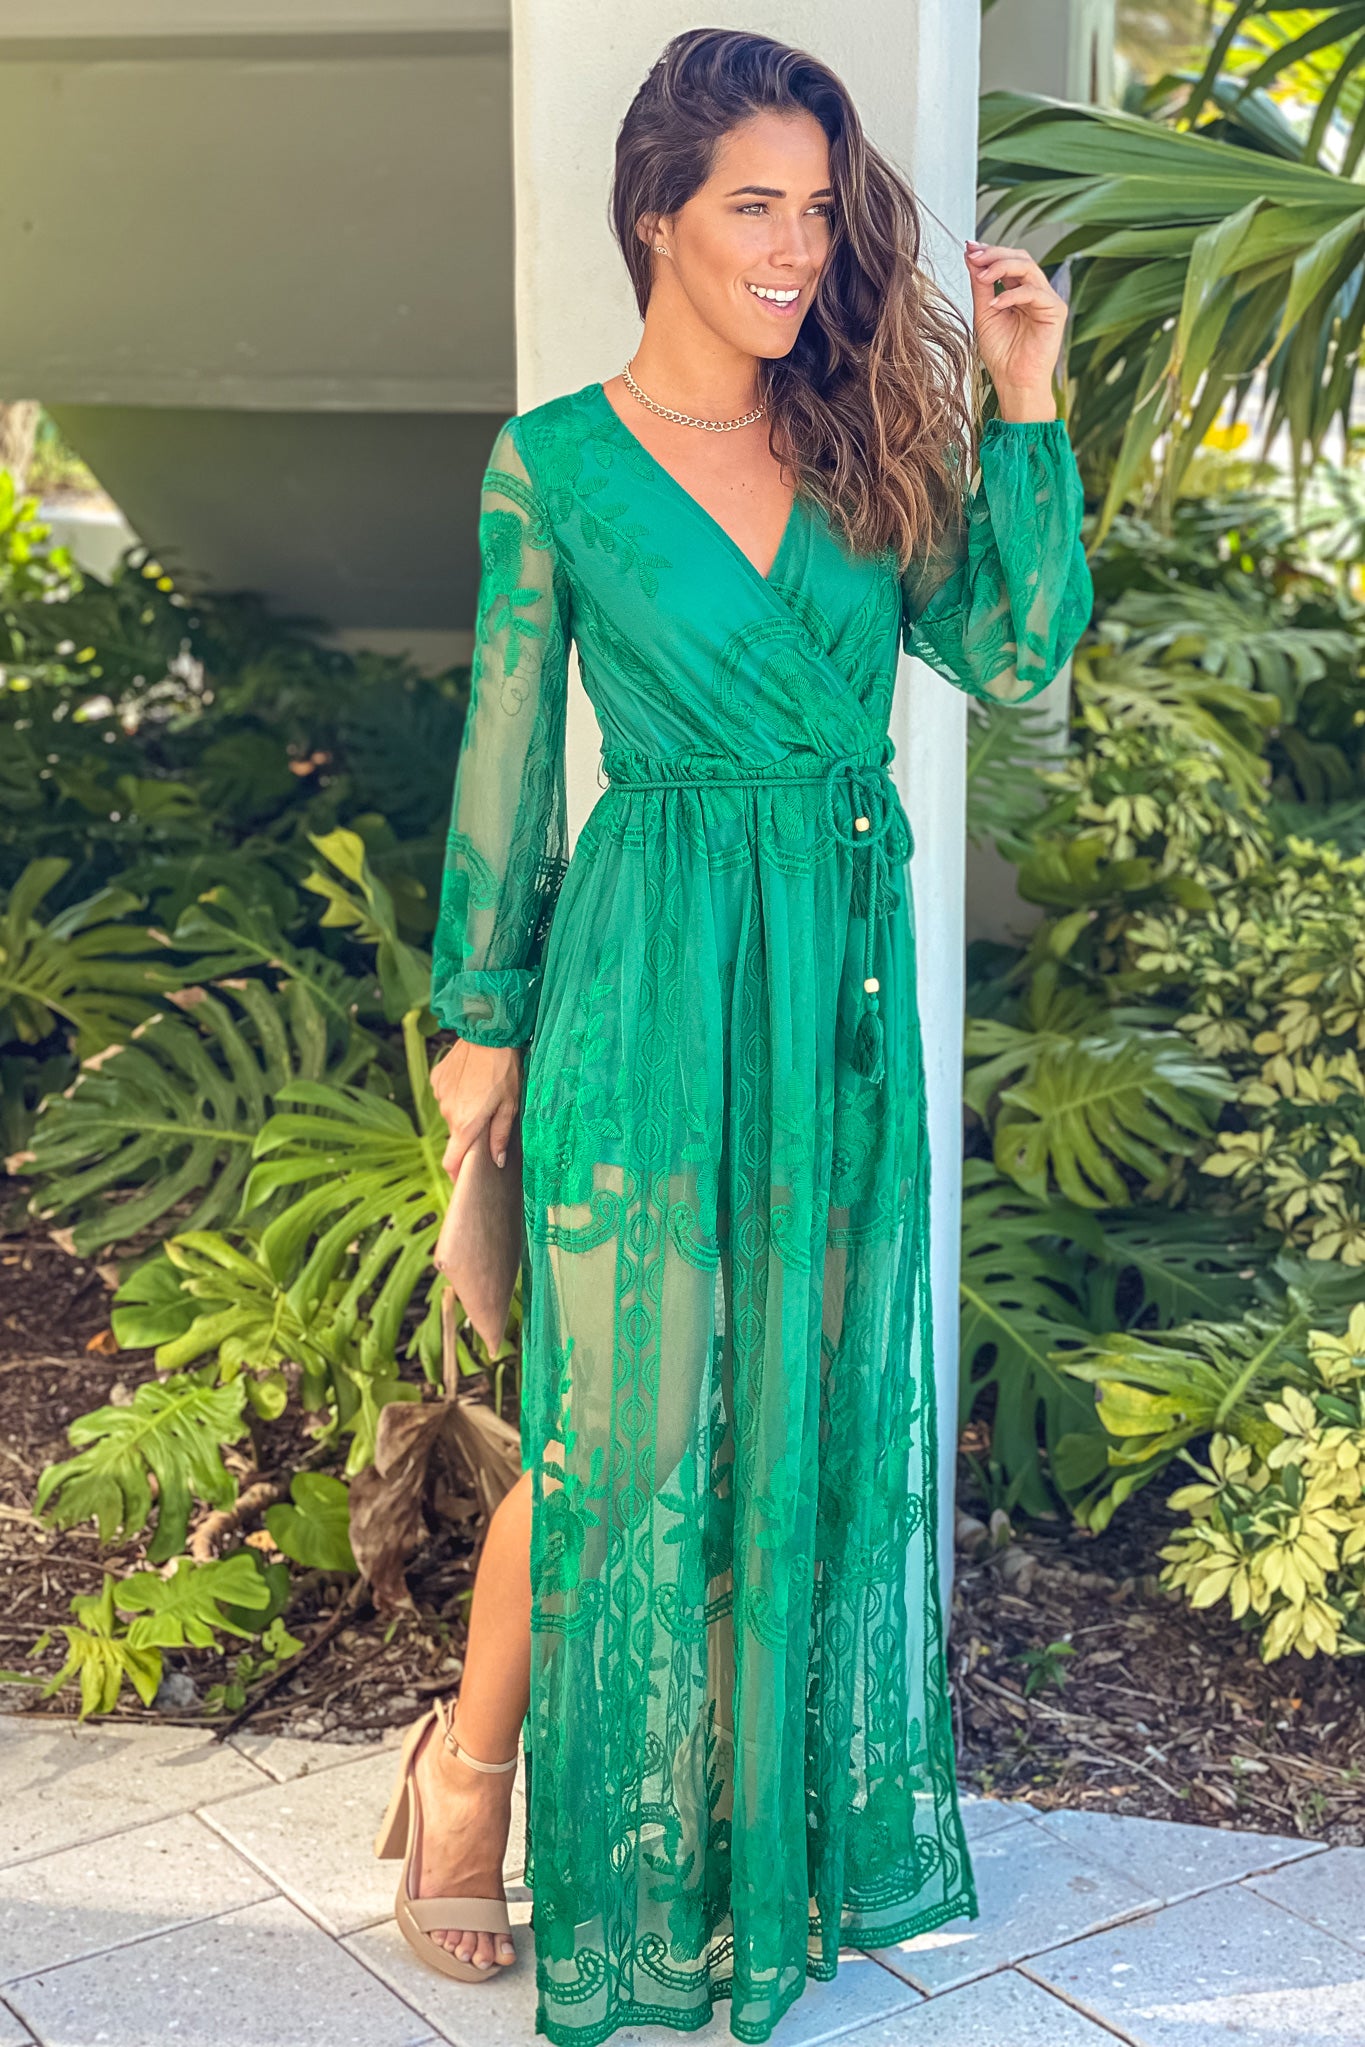 Hunter Green Lace Maxi Dress With Belt ...